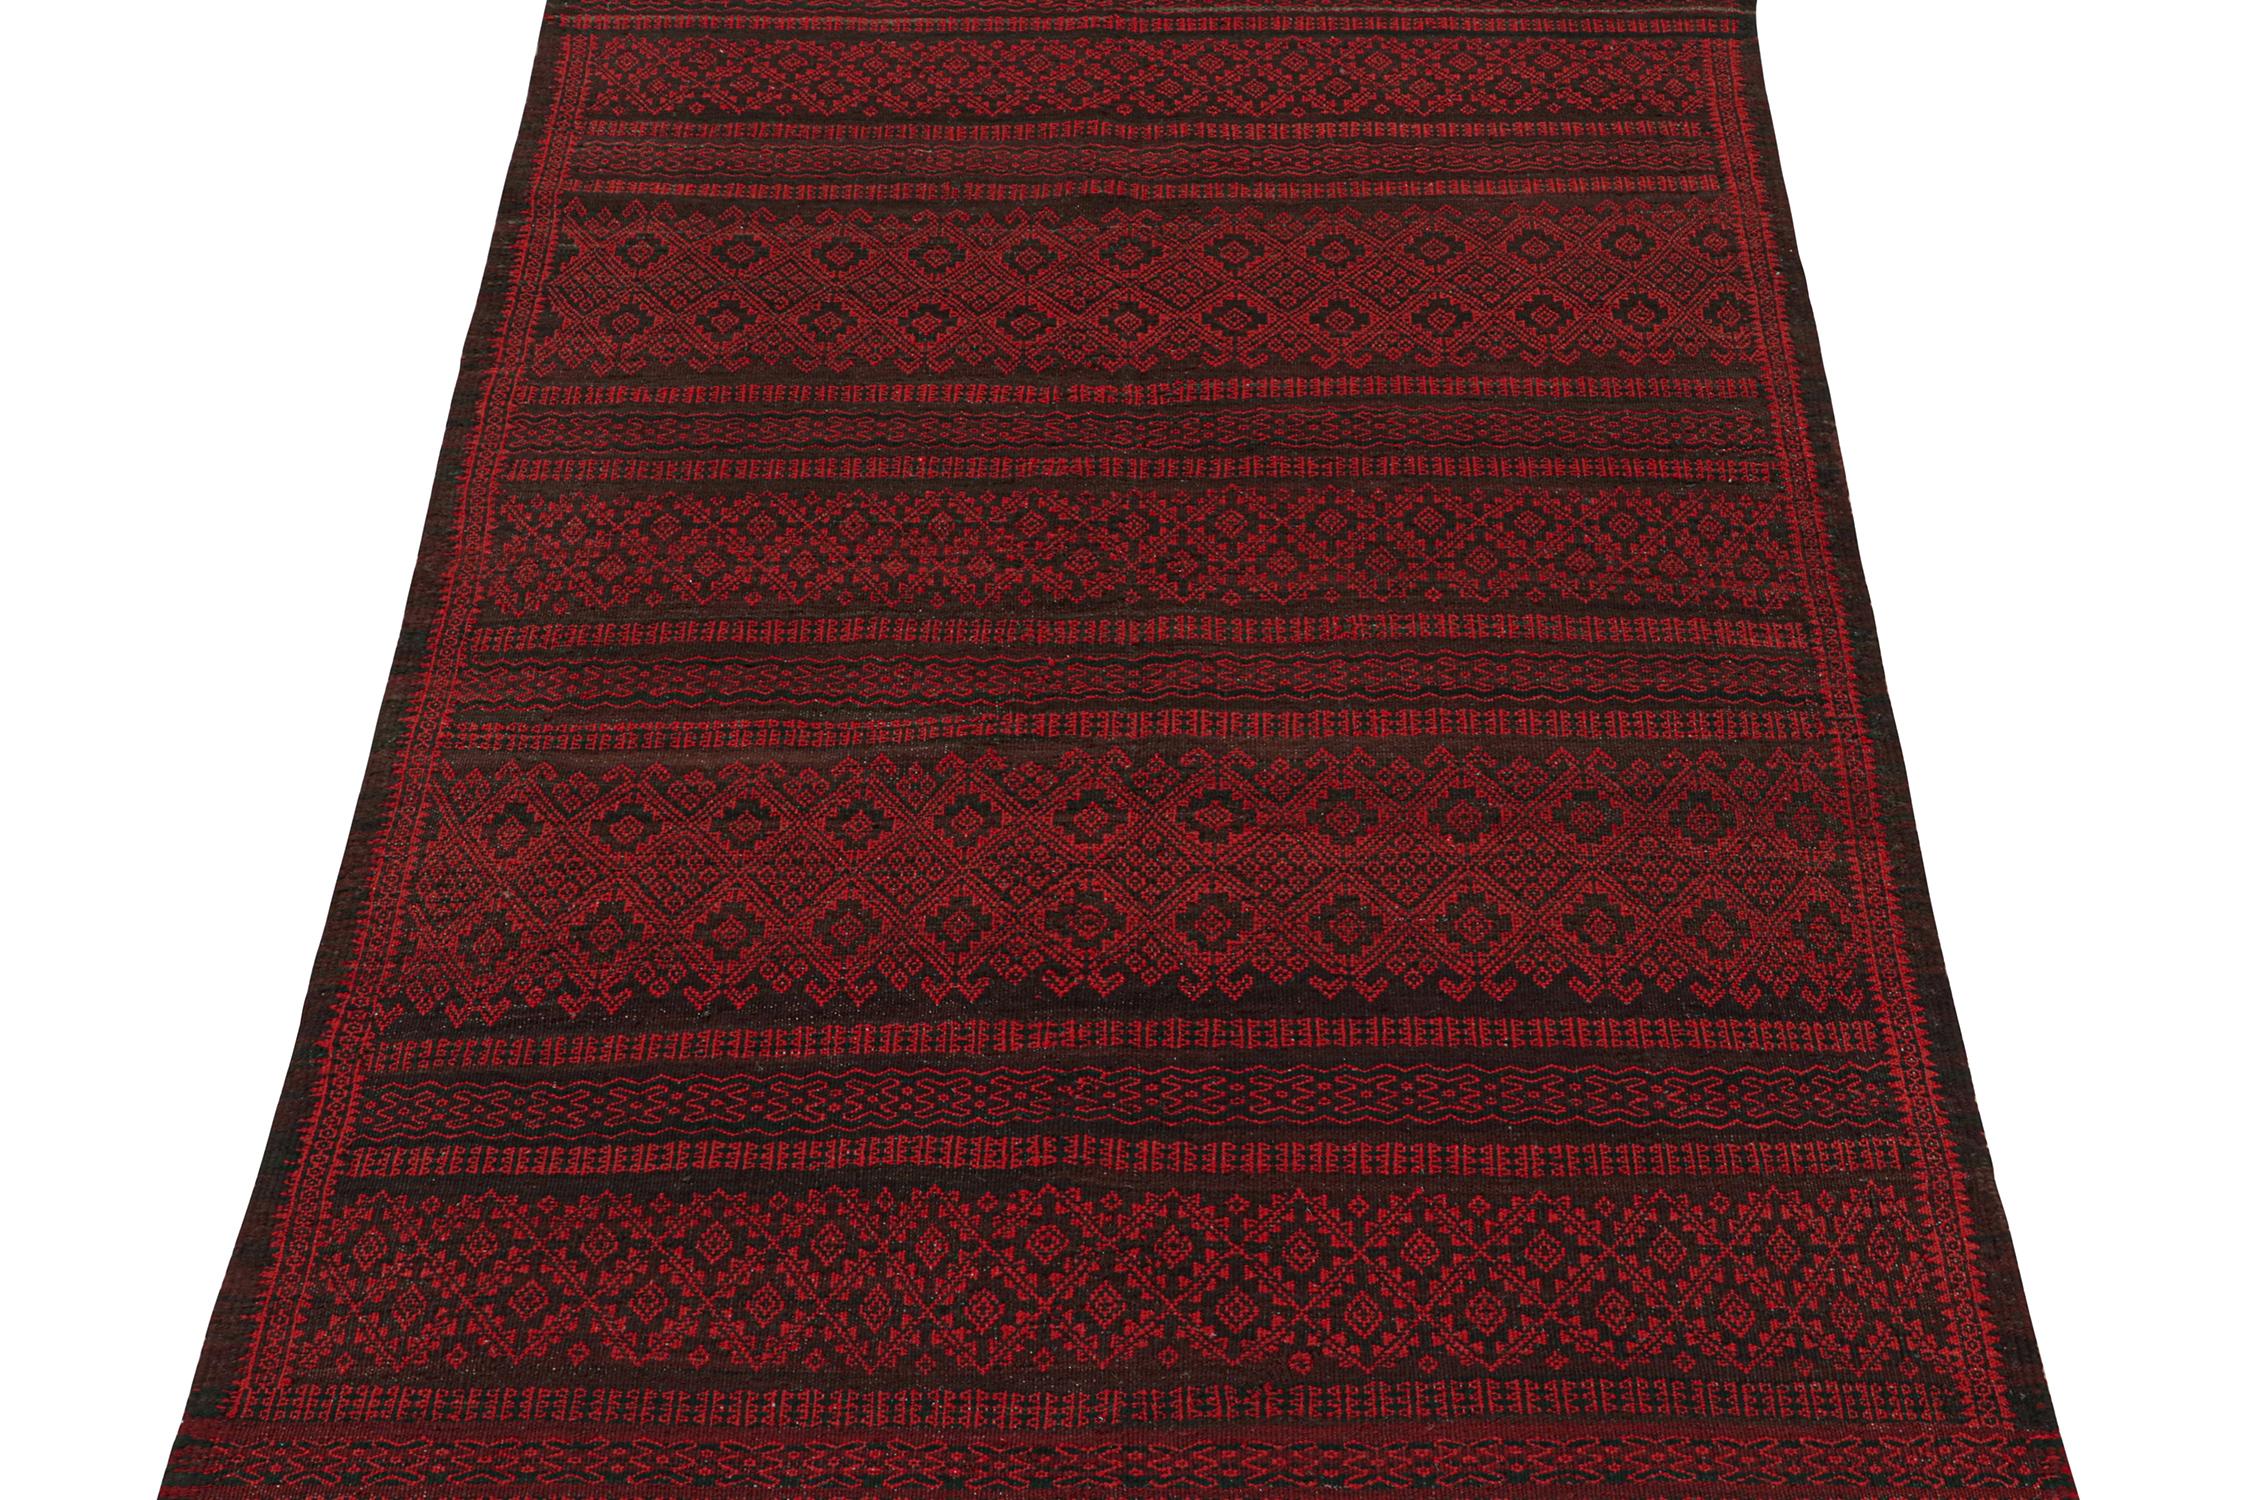 This vintage 5x7 kilim is a midcentury tribal rug that originates from Turkey—handwoven in wool, circa 1950-1960.

Its design enjoys a rich play of burgundy with crimson red and black geometric patterns. 
This midcentury tribal Kilim further